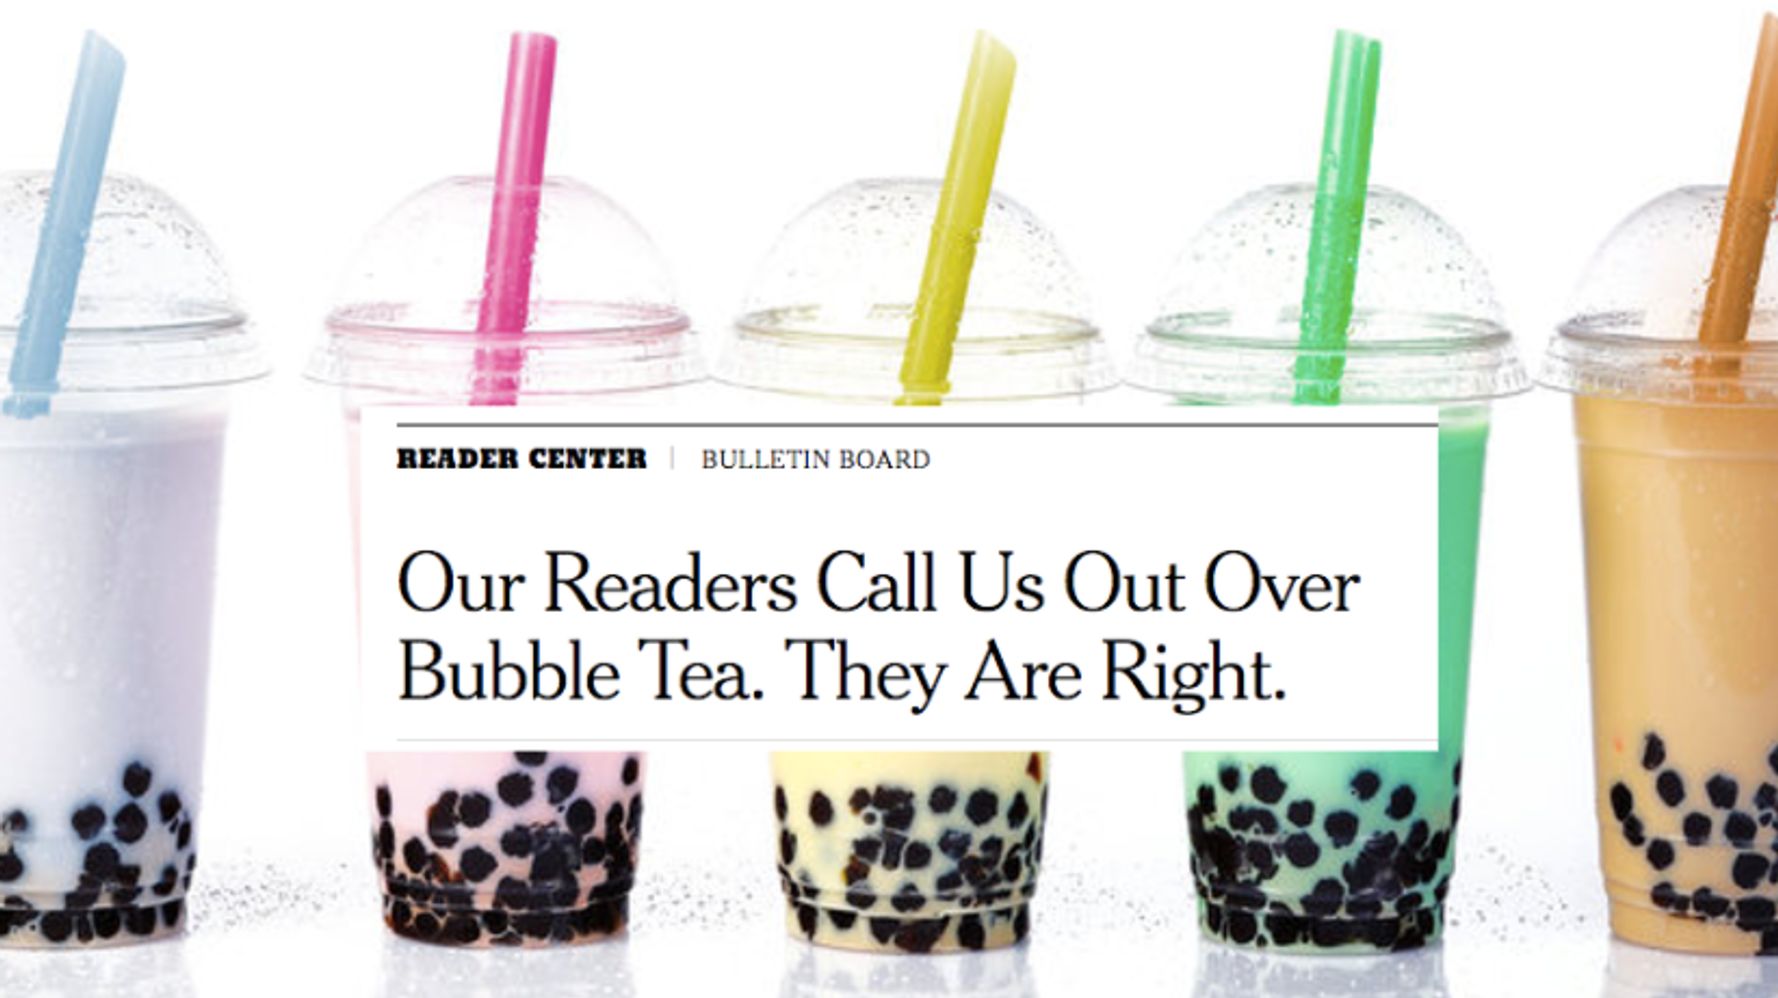 Boba tea shortage explained: Why the bubble drink's facing tough times -  CNET